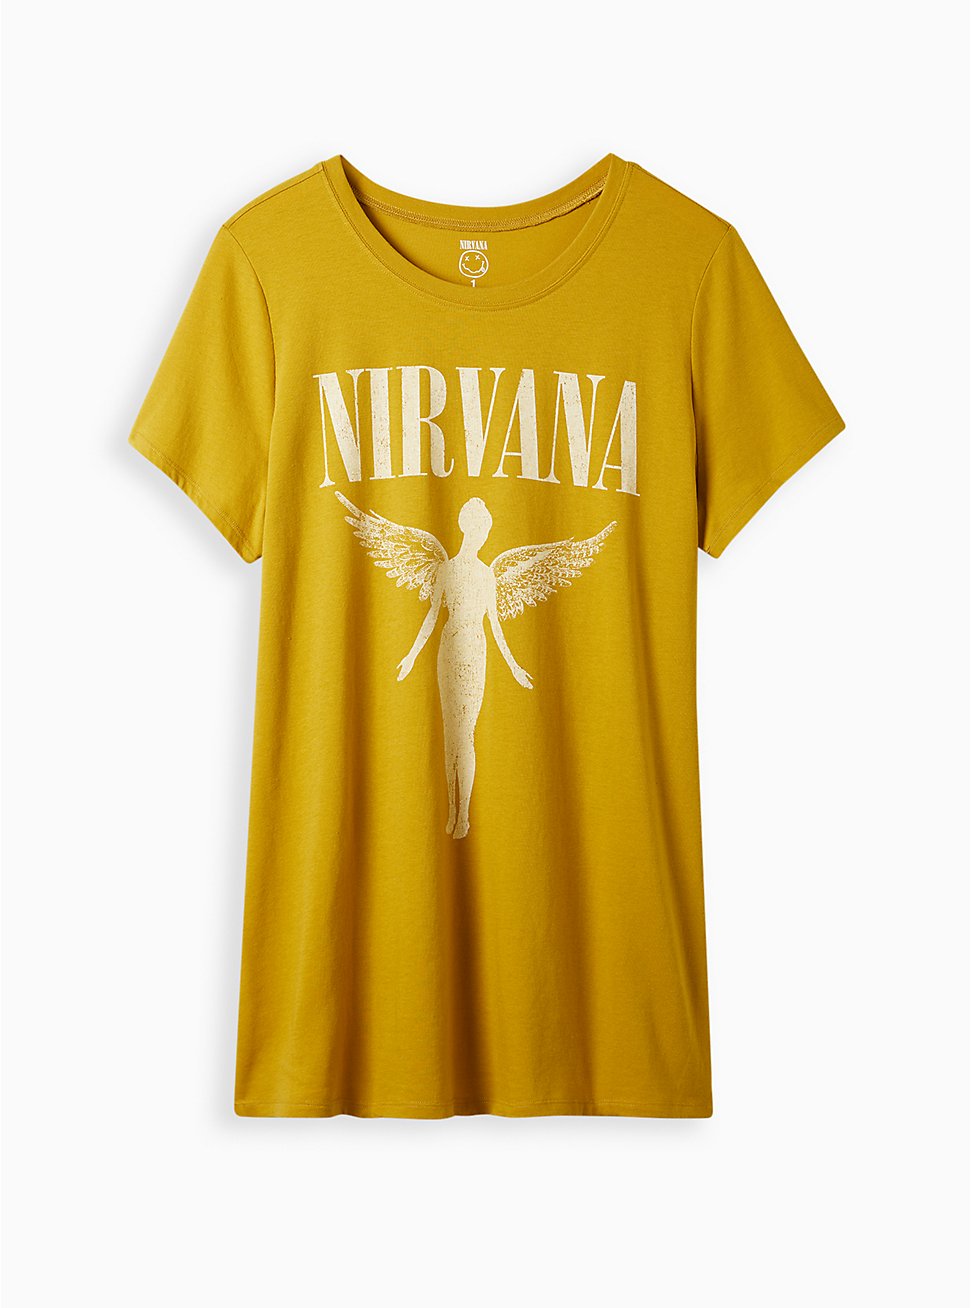 Classic Fit Tunic Tee - Nirvana Gold, OLIVE, hi-res